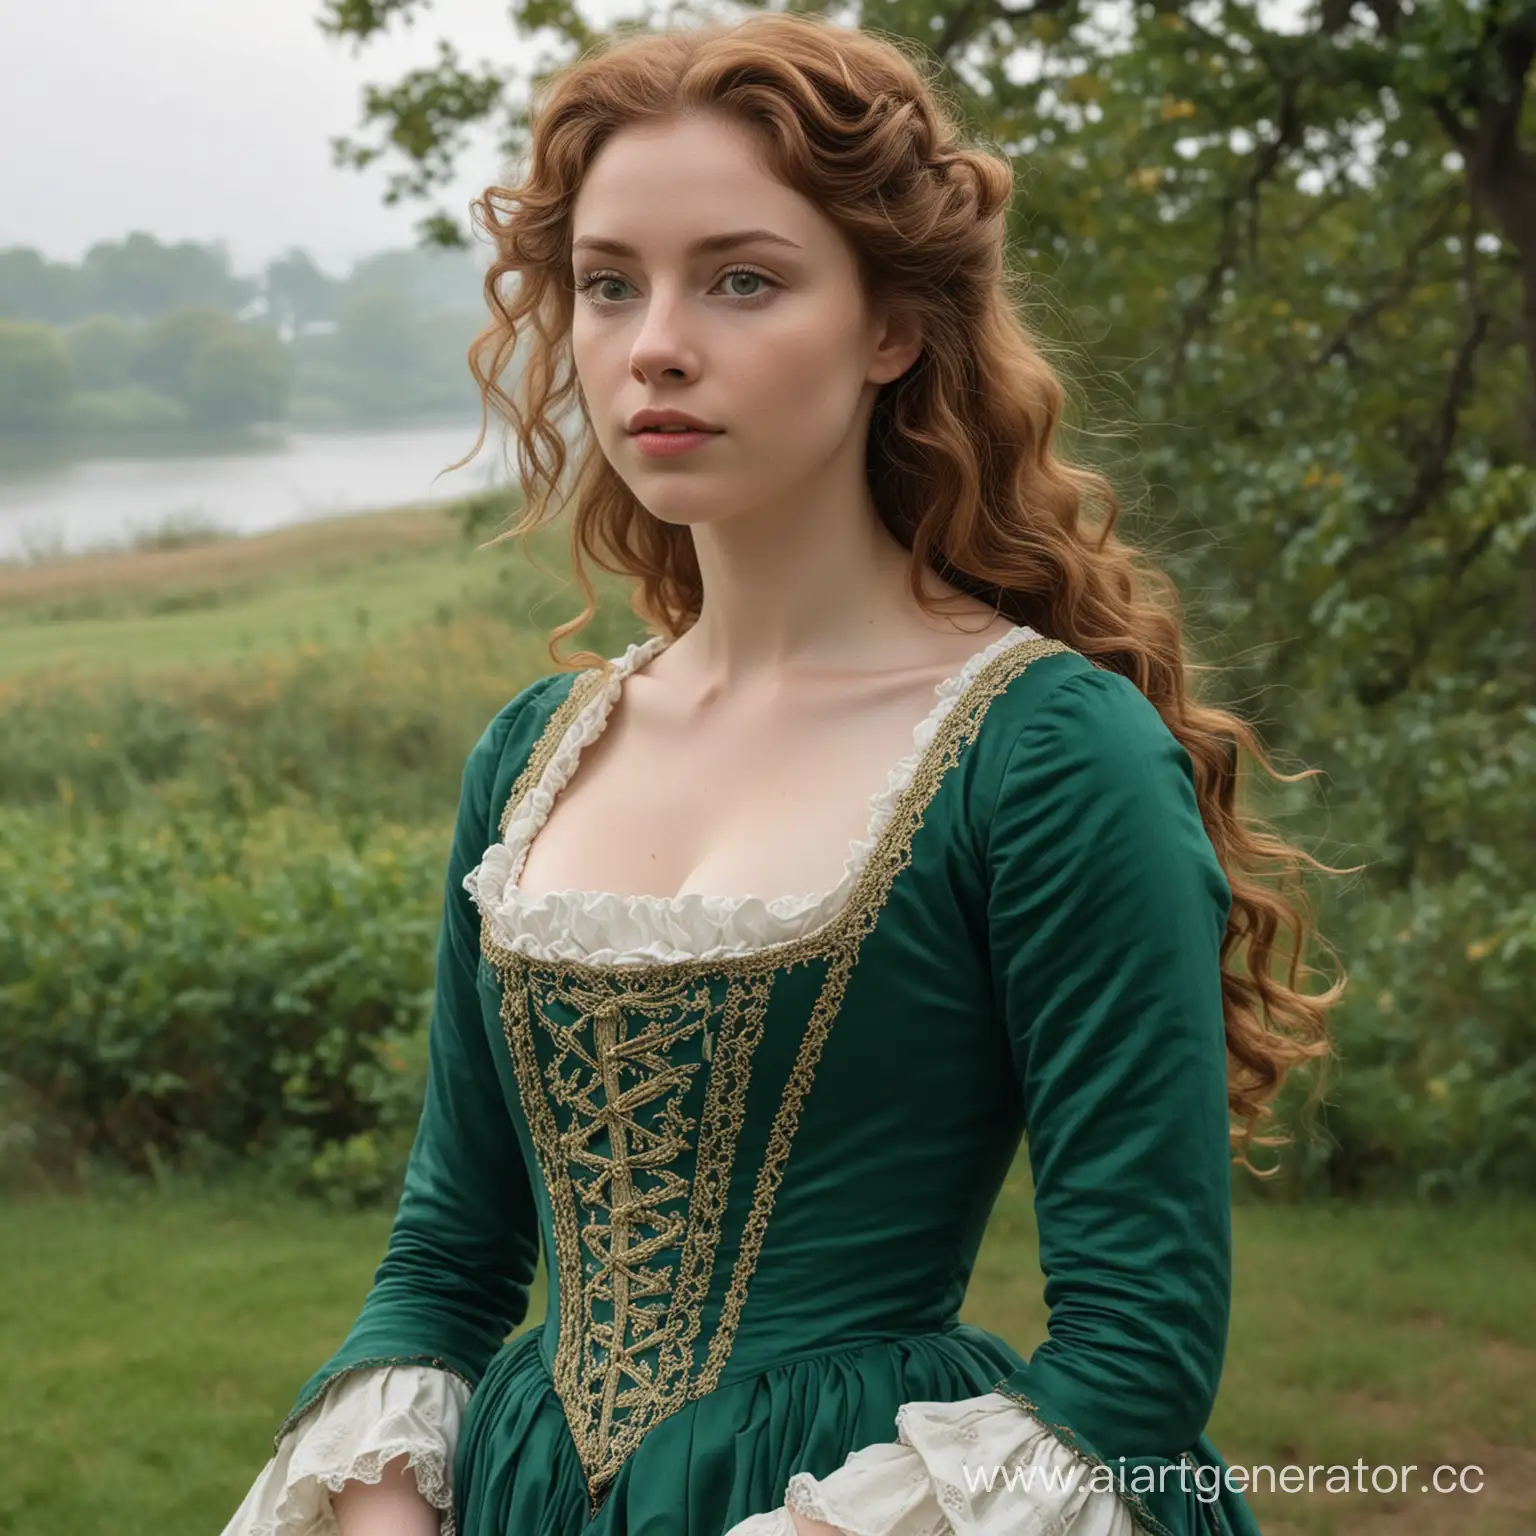 Enigmatic-Young-Woman-in-18thCentury-Attire-with-Chestnut-Hair